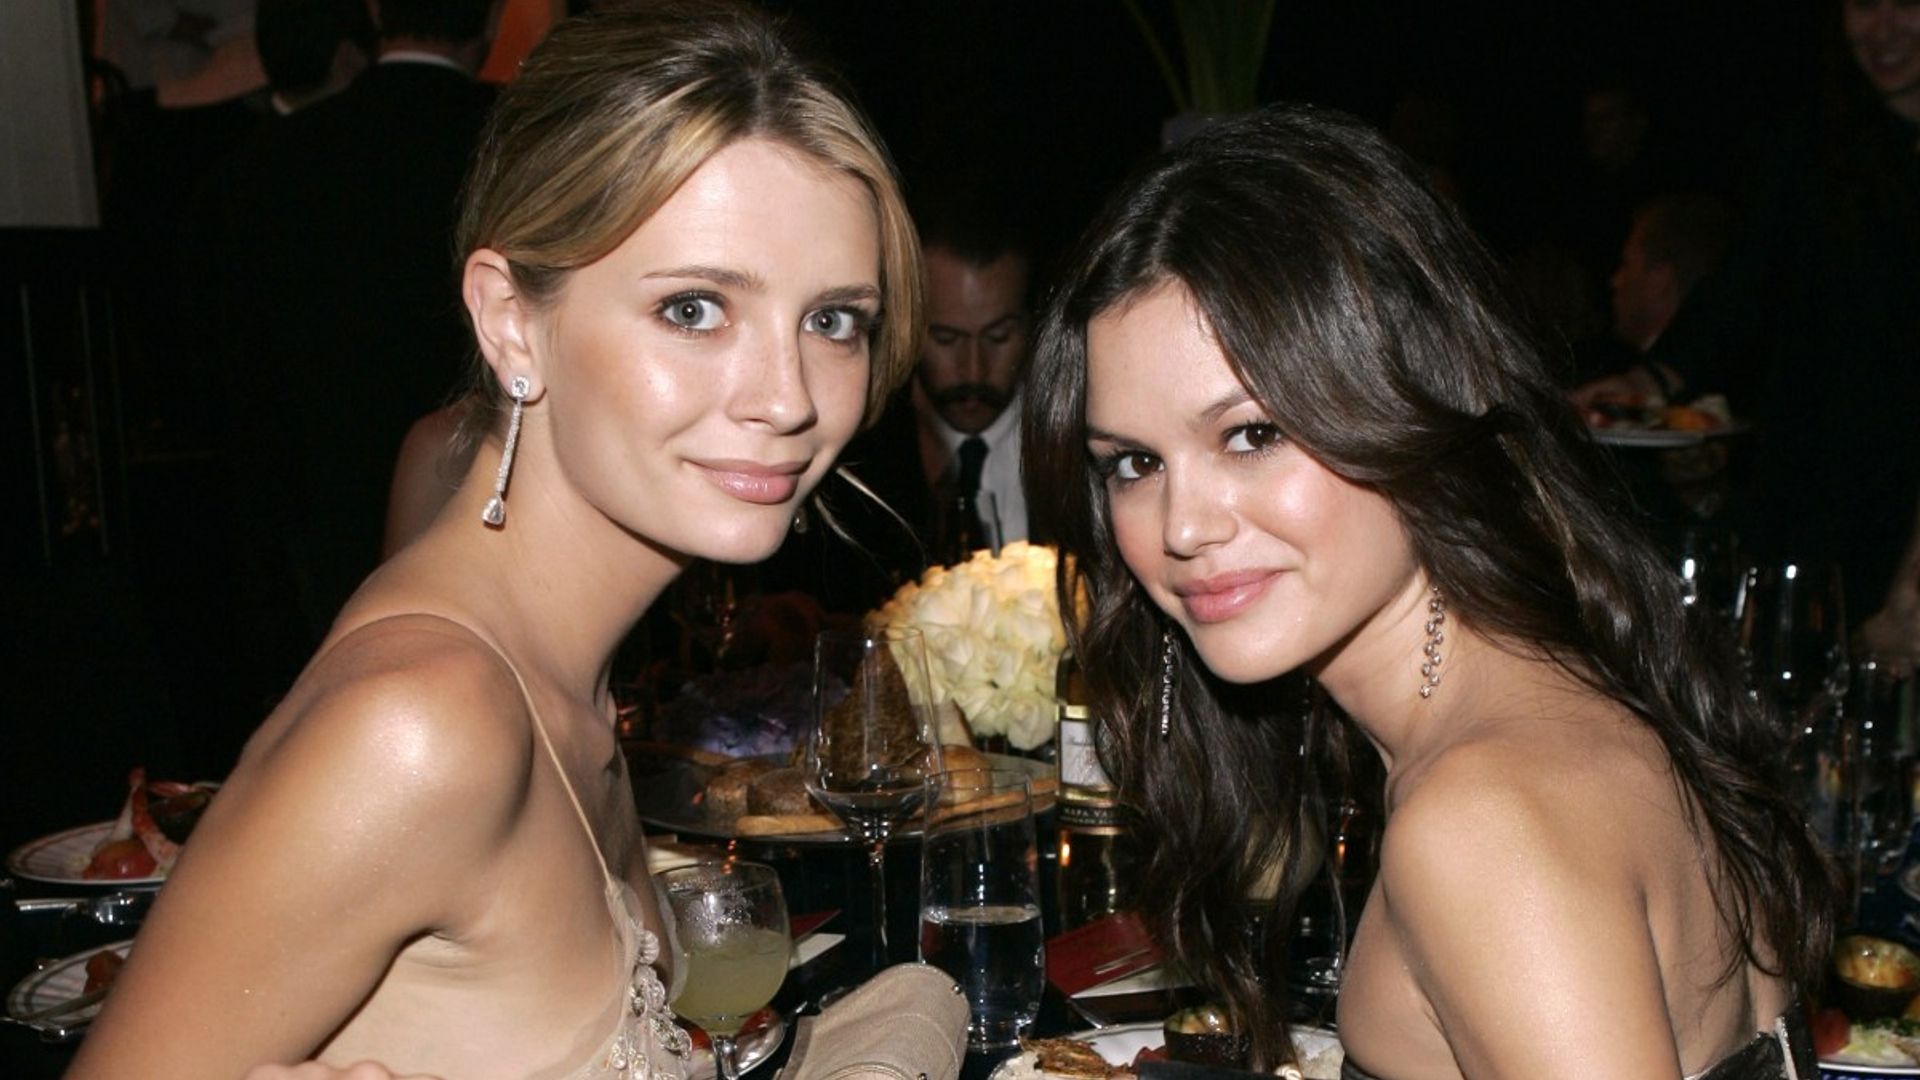 Rachel Bilson hits back at former co-star Mischa Barton's comments about The OC 